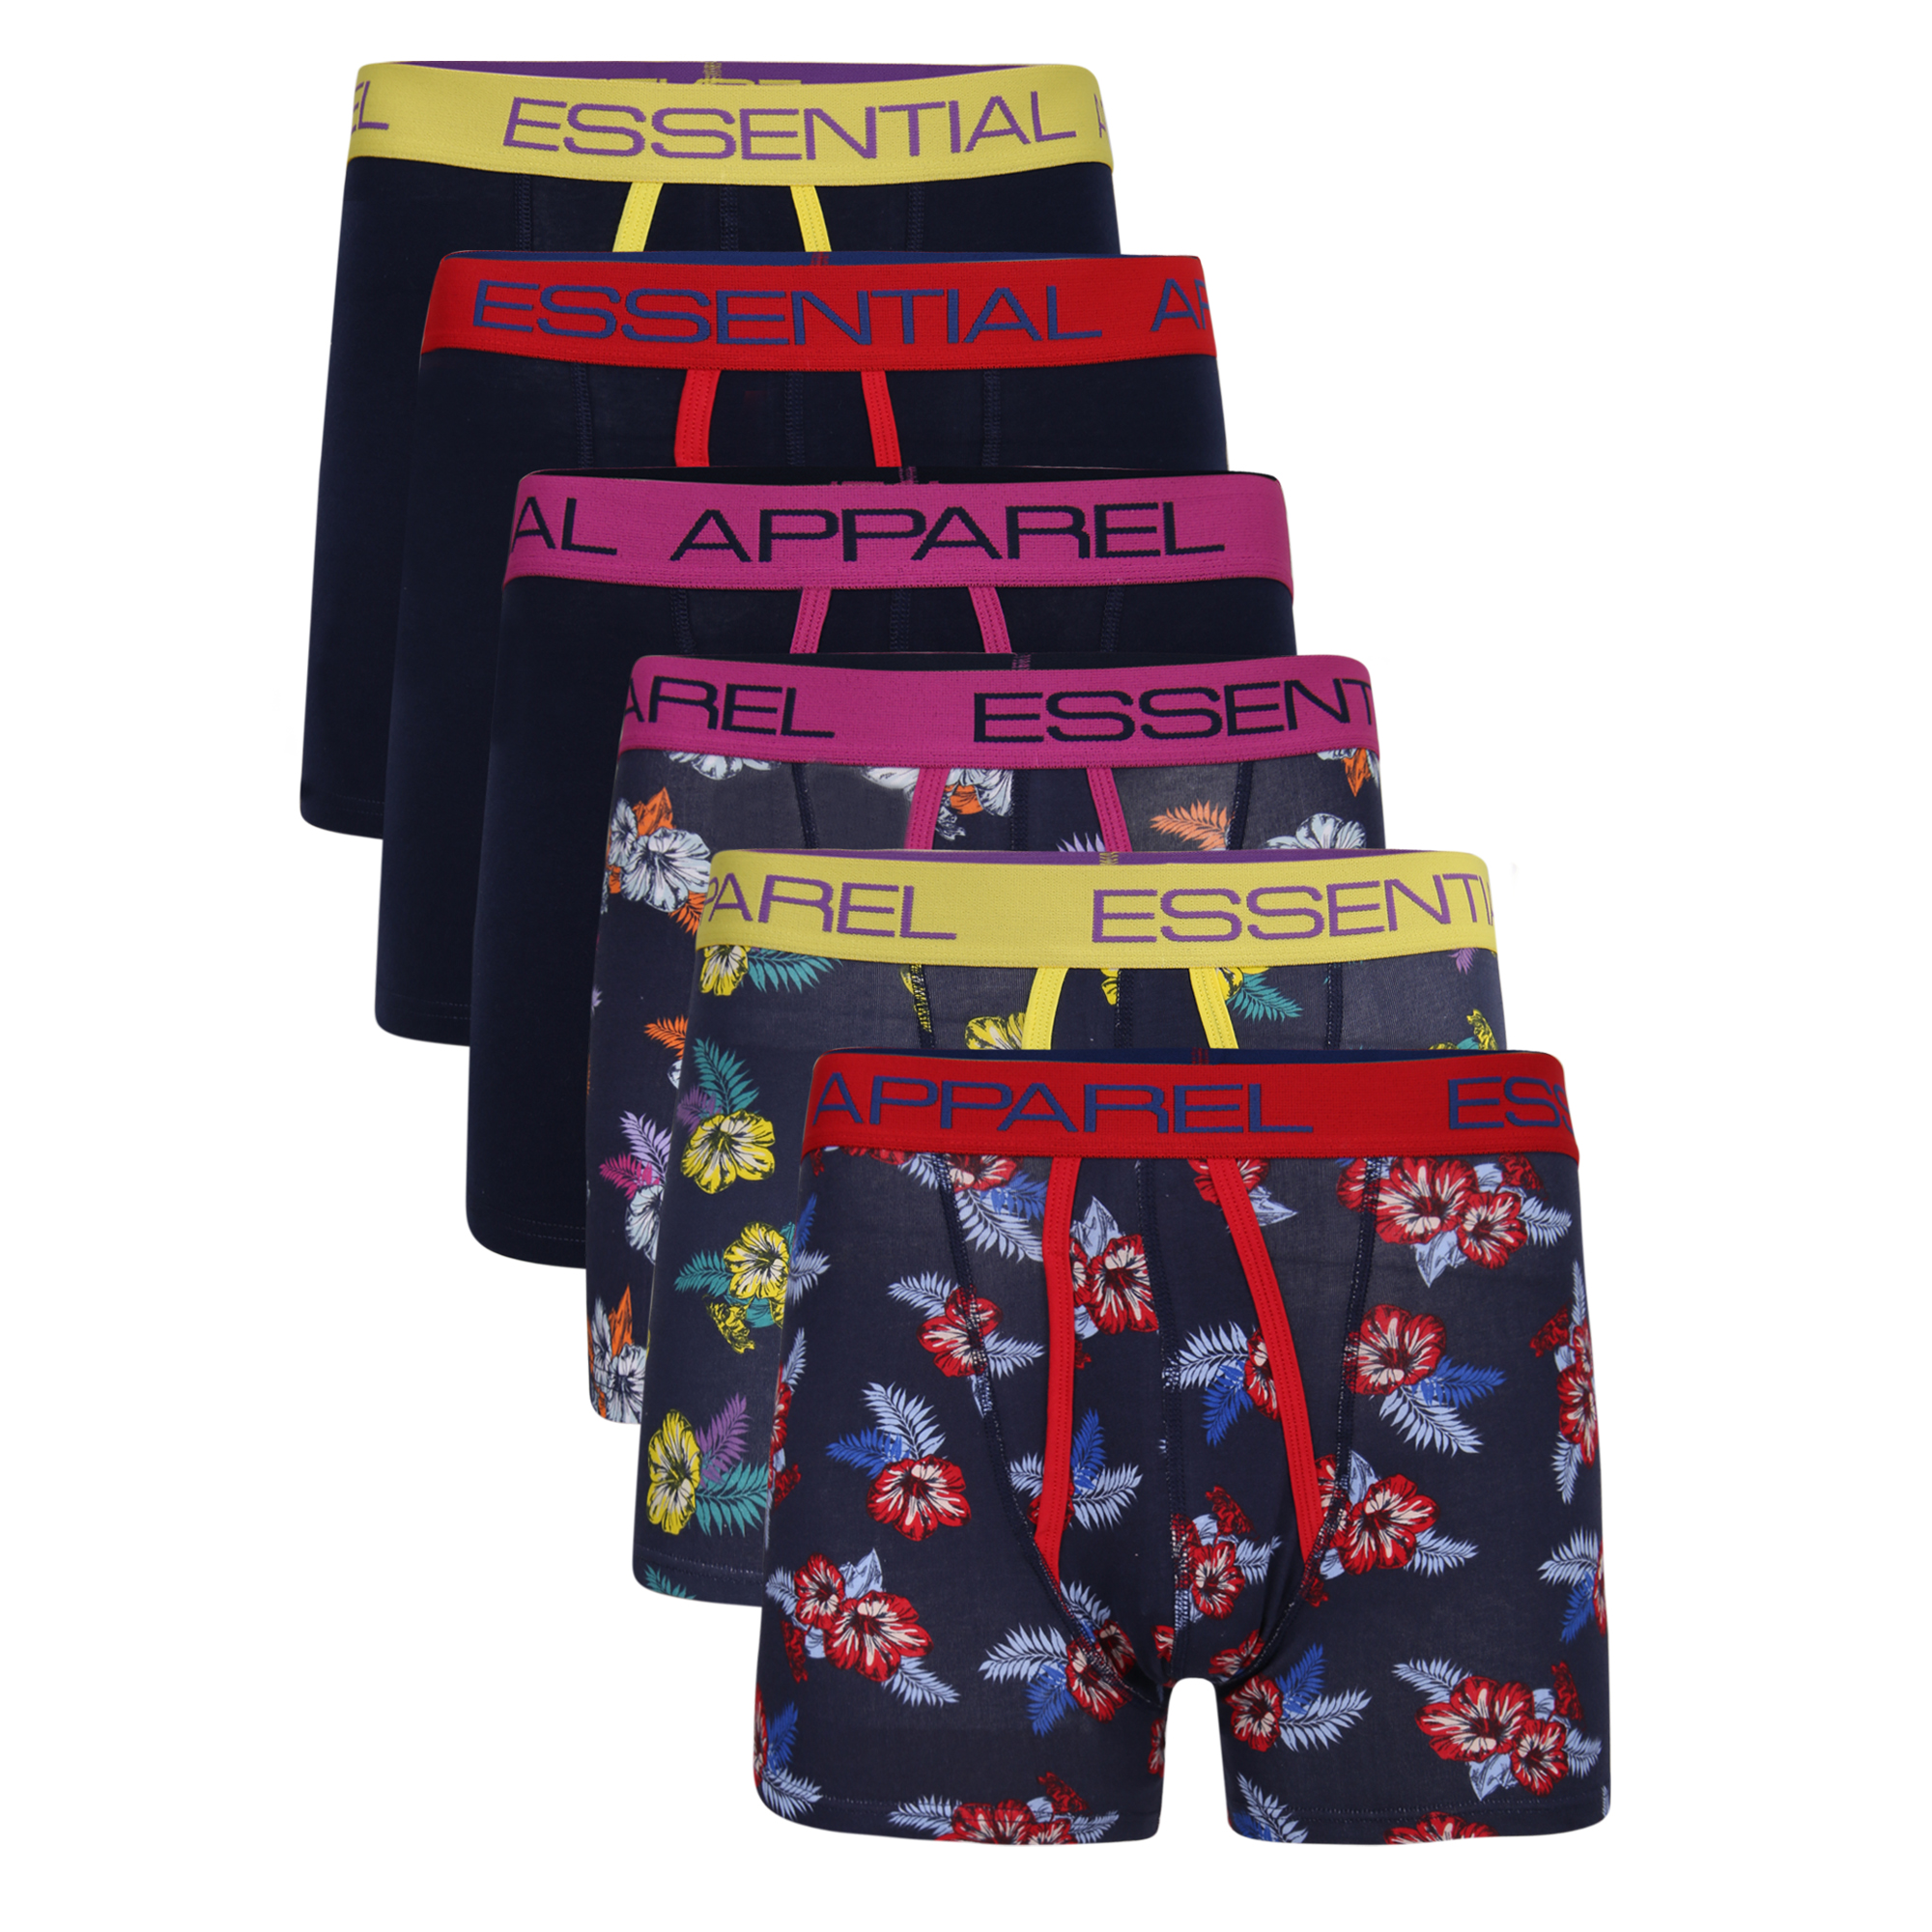 Mens 6 Pack Boxer Shorts Underwear Underpants Trunks Multipack Boxers Size S 4xl Ebay 2889